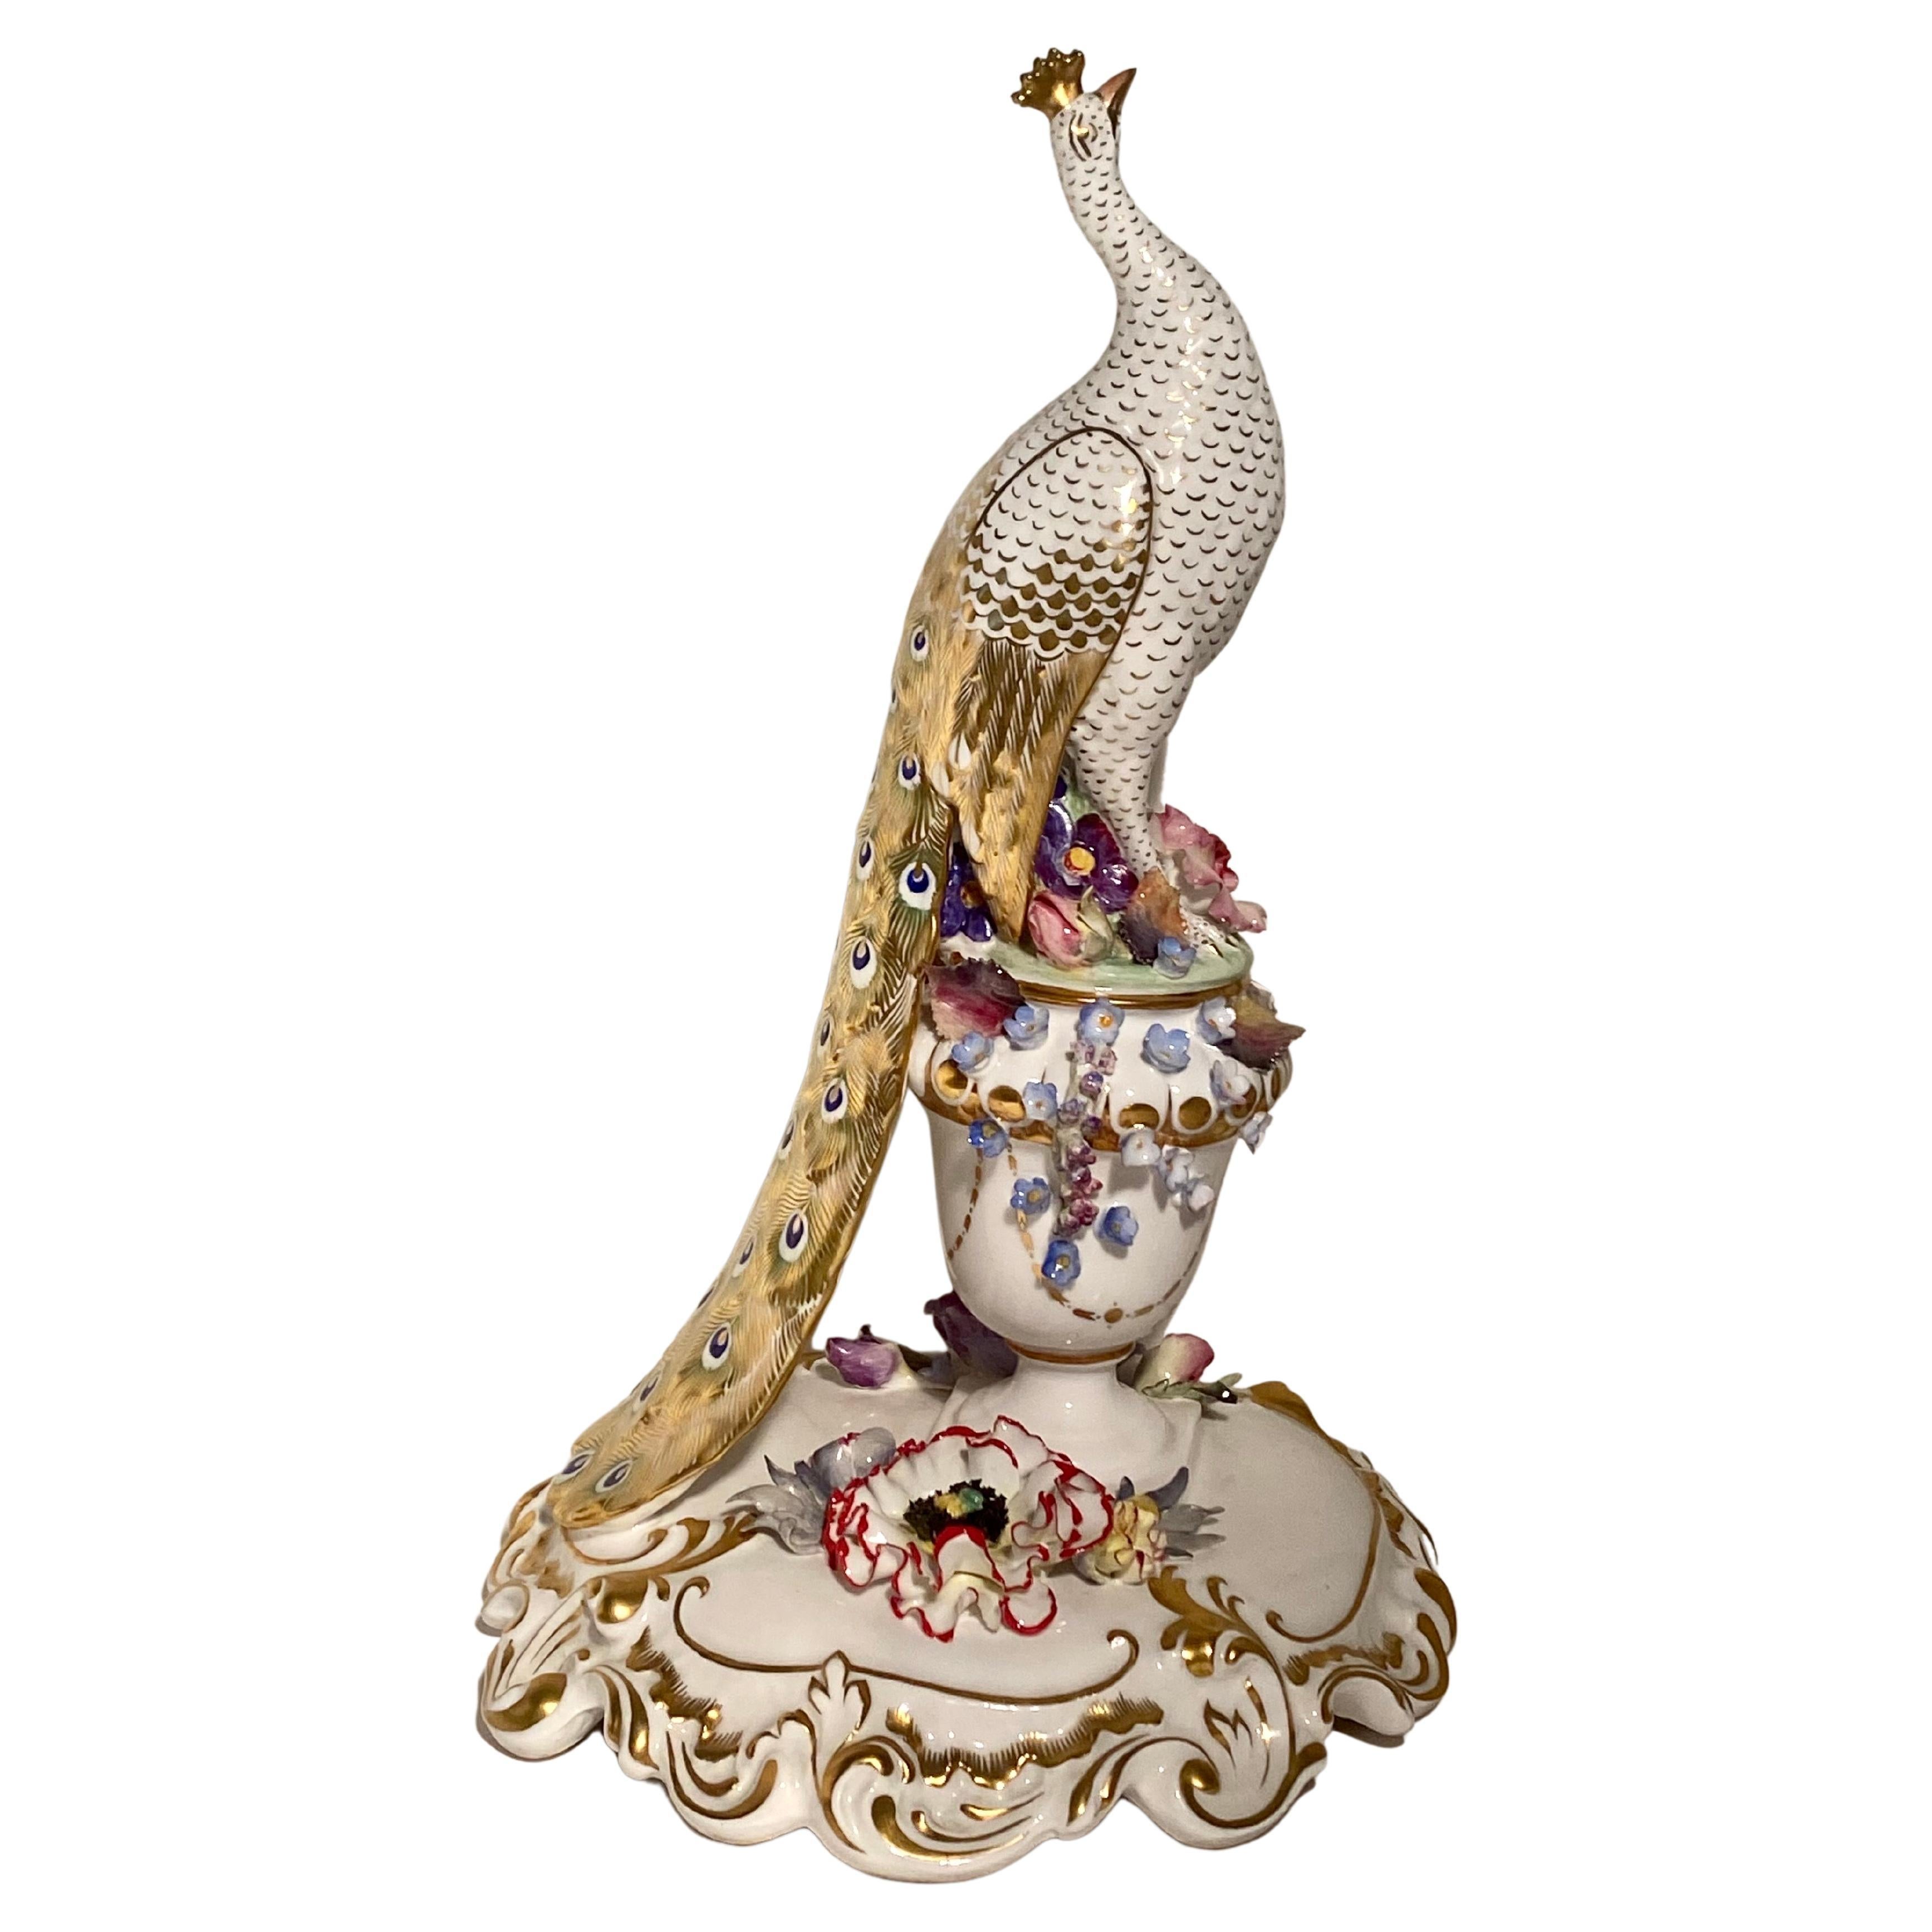 English Royal Crown Derby Porcelain Figure, Modelled as a Peacock For Sale